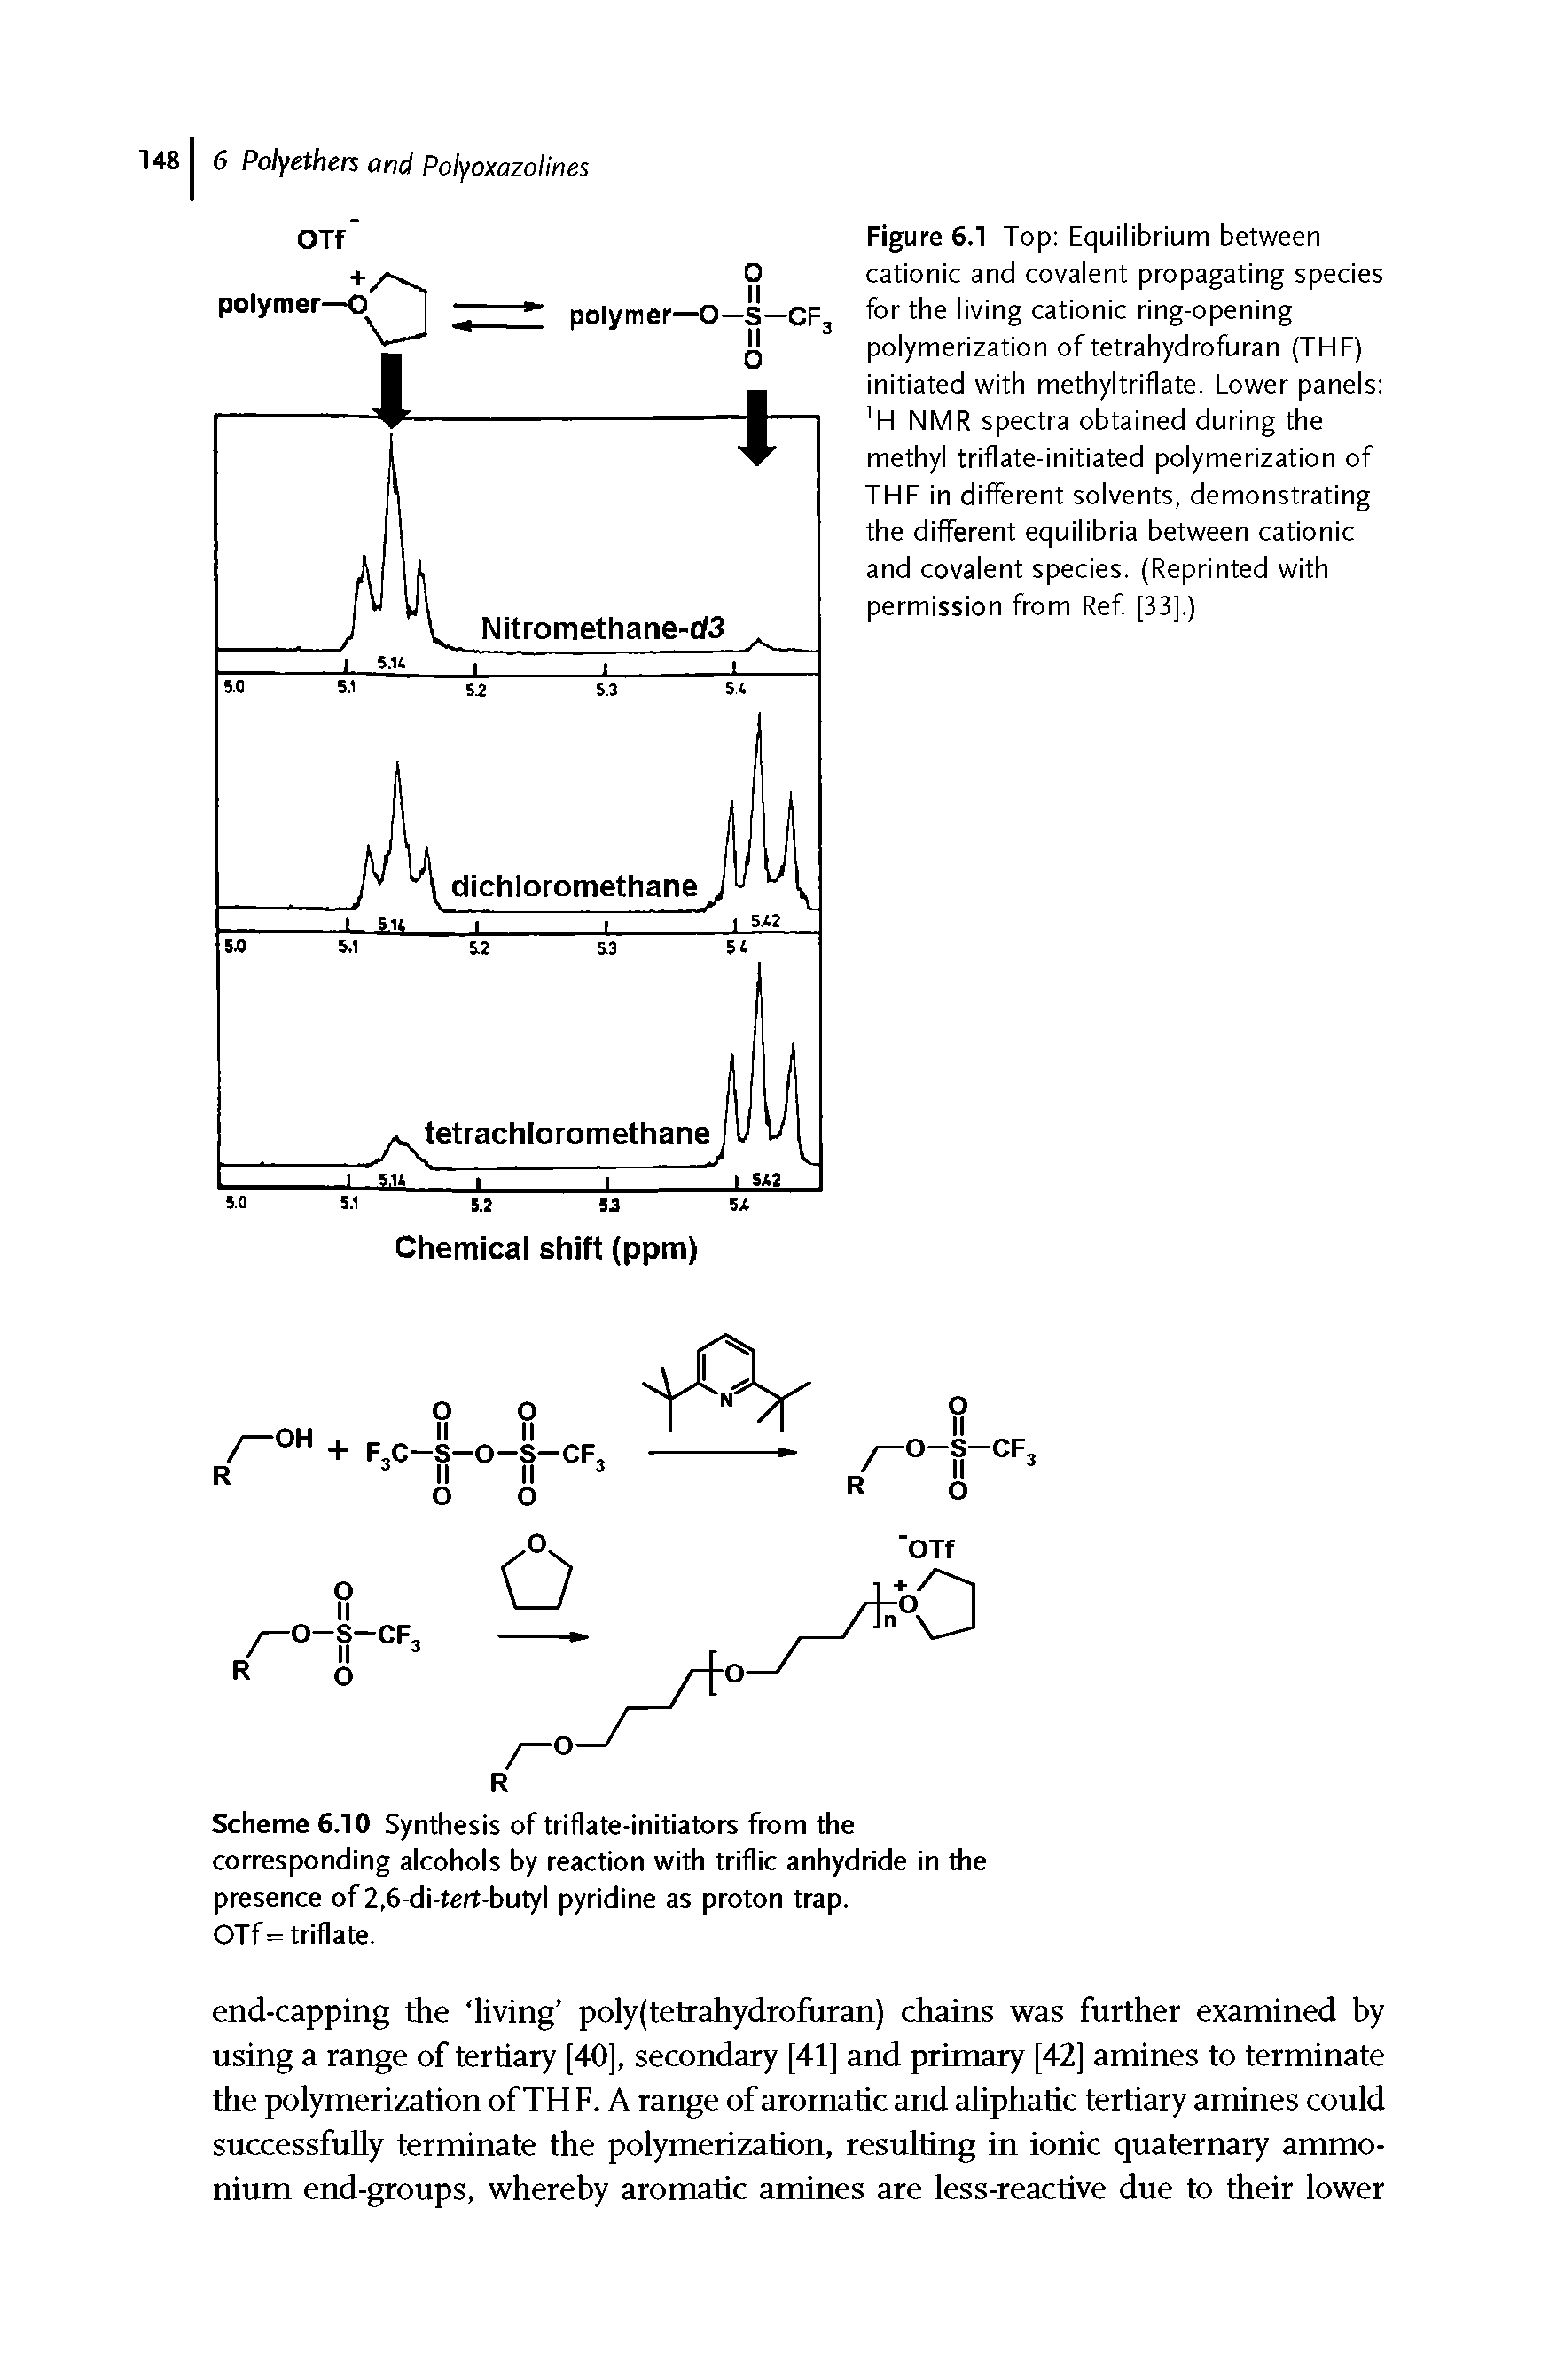 Figure 6.1 Top Equilibrium between cationic and covalent propagating species for the living cationic ring-opening polymerization of tetrahydrofuran (THE) initiated with methyltriflate. Eower panels H NMR spectra obtained during the methyl triflate-initiated polymerization of THE in different solvents, demonstrating the different equilibria between cationic and covalent species. (Reprinted with permission from Ref [33].)...